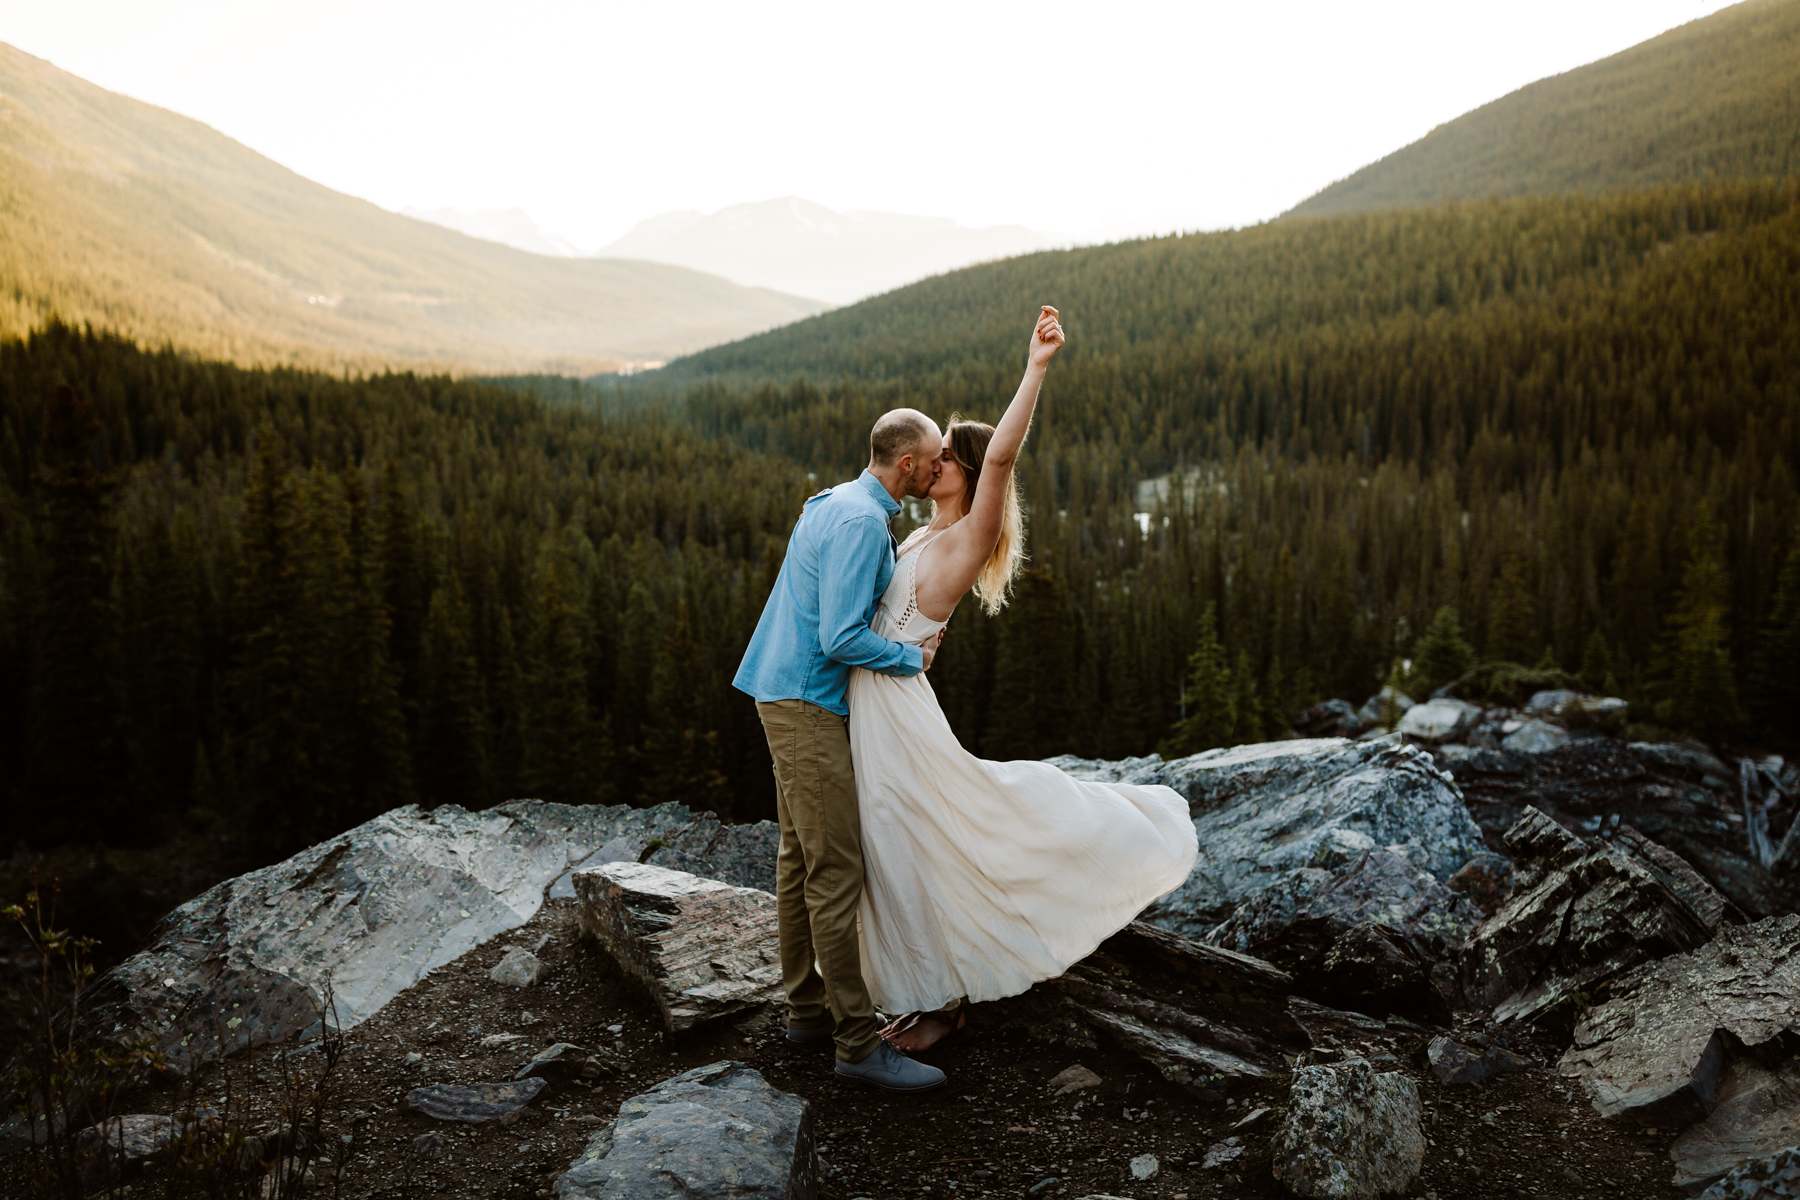 Adventure elopement photographers at Moraine Lake for an anniversary photography session